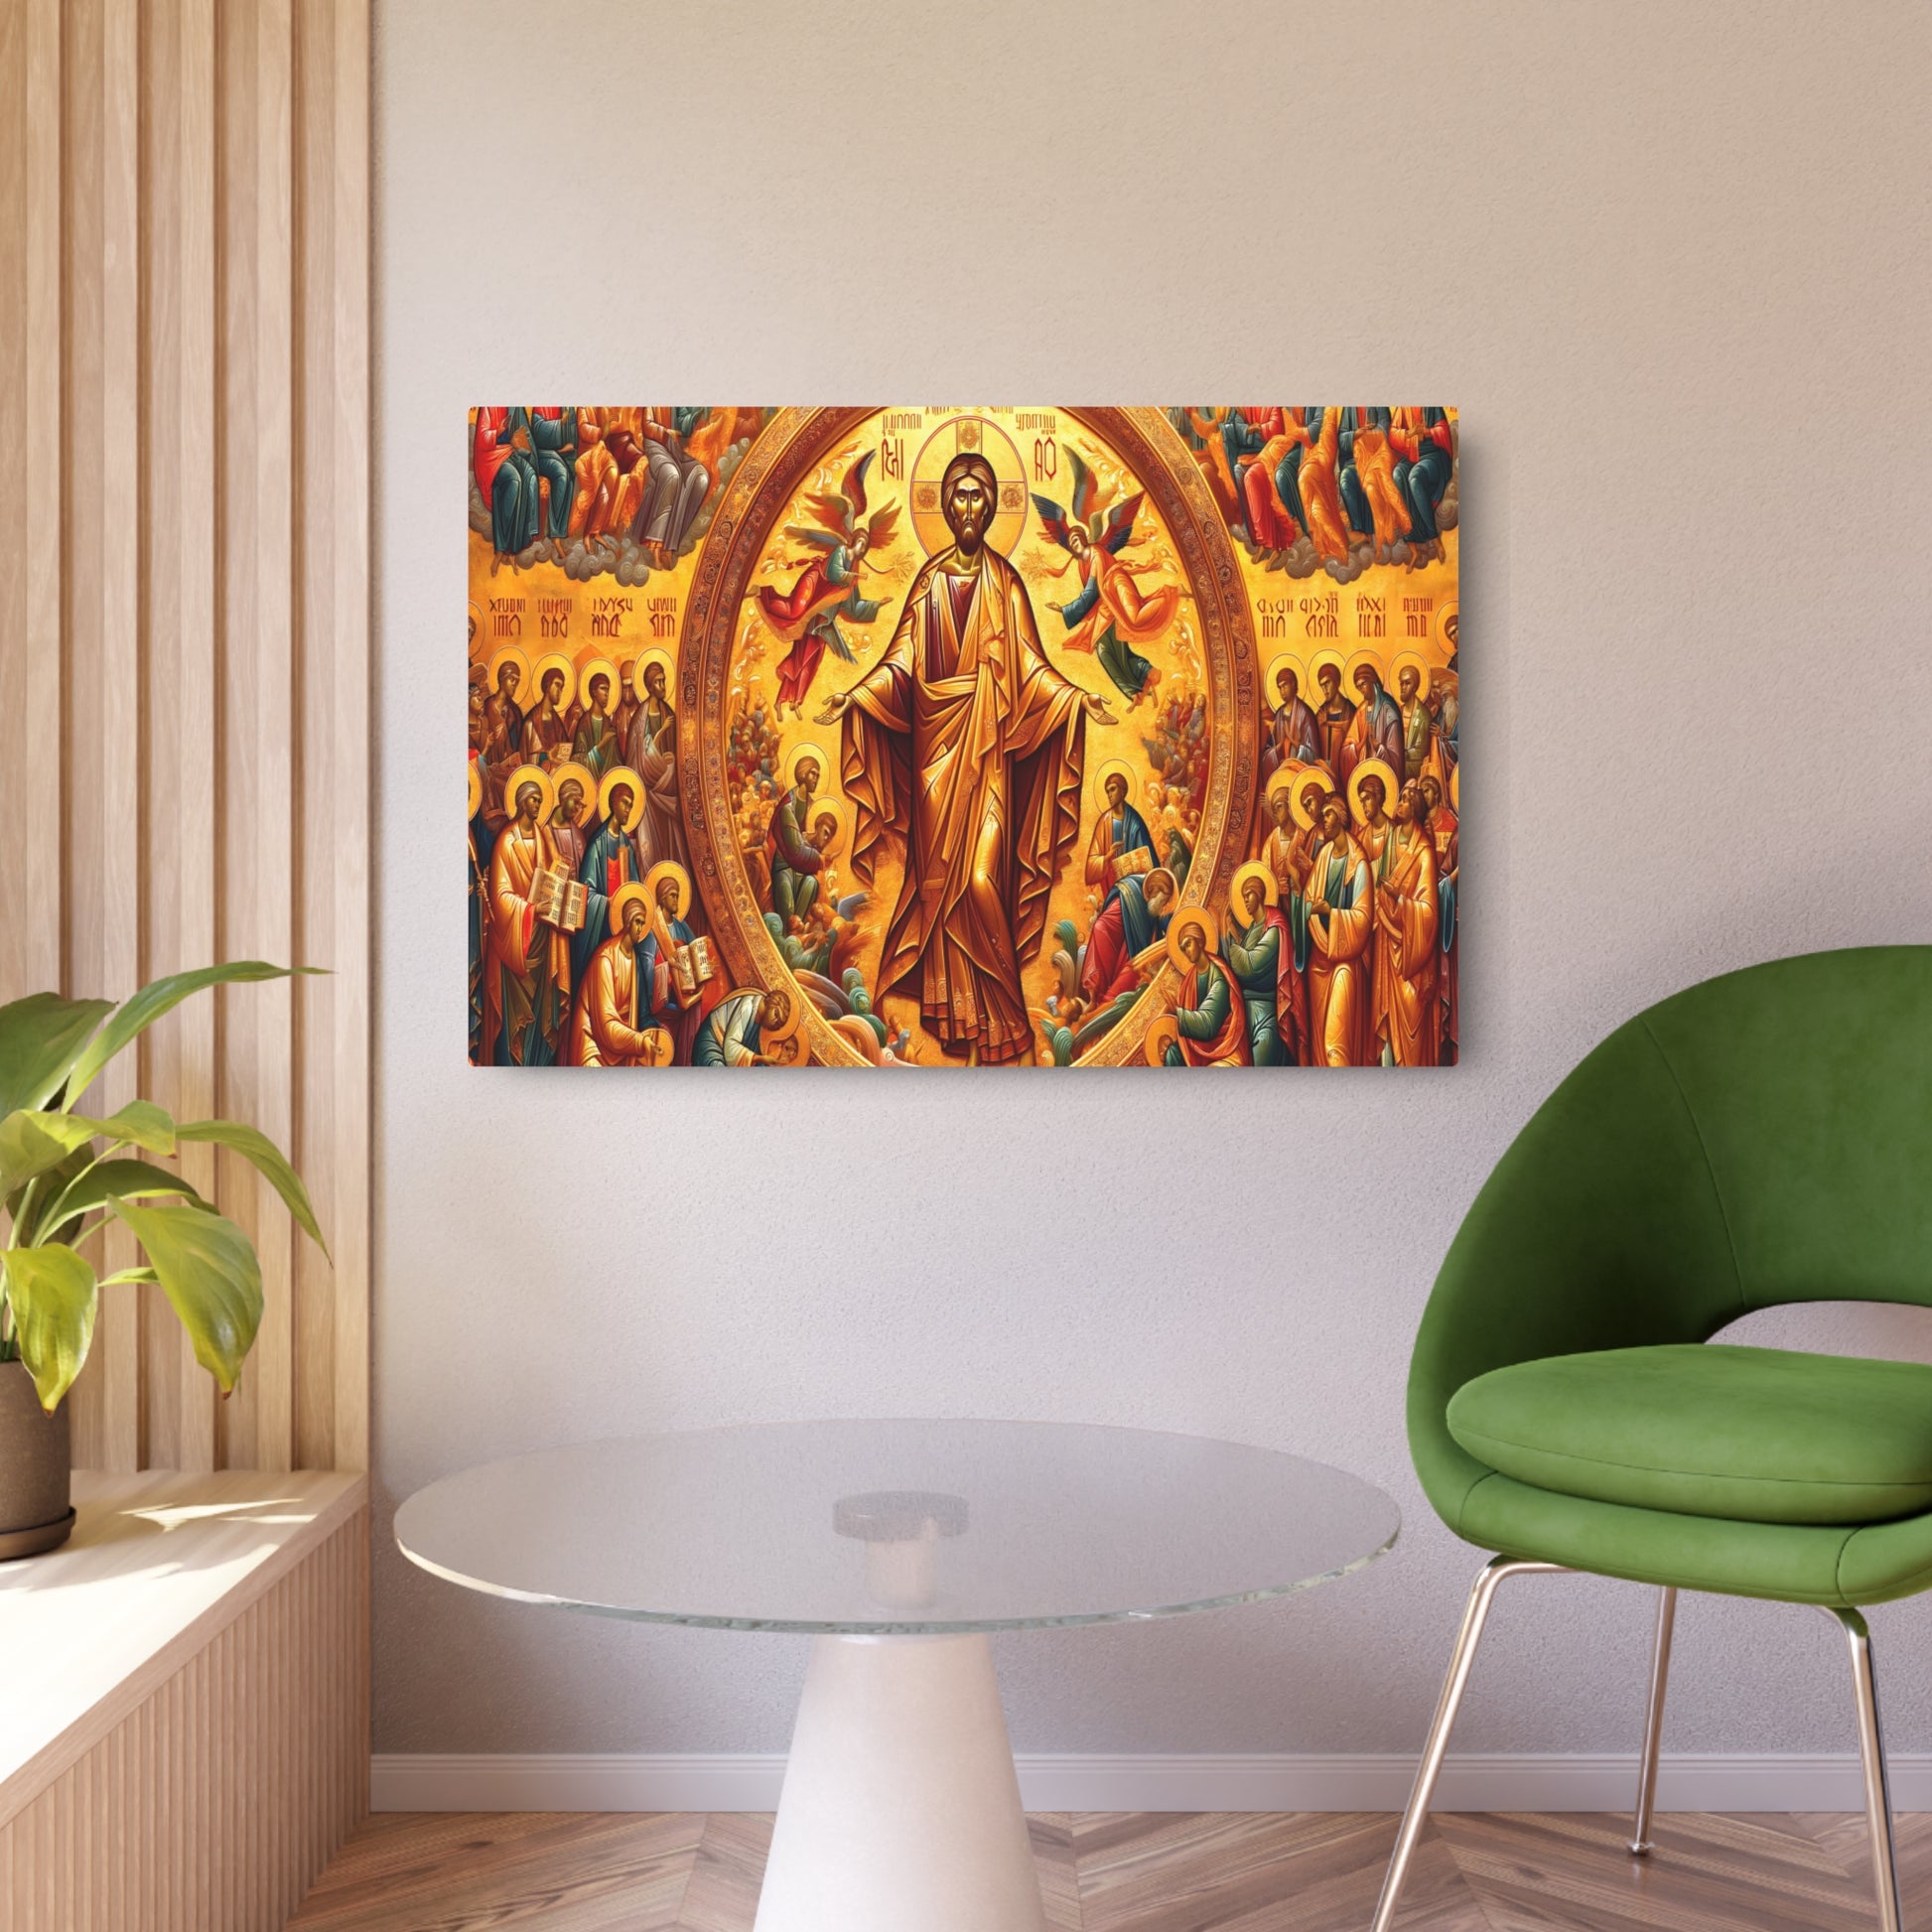 "Religious Byzantine Art Style Masterpiece with Luxurious Gold Backgrounds - Non-Western Global Styles Collection" - Metal Poster Art 36″ x 24″ (Horizontal) 0.12''